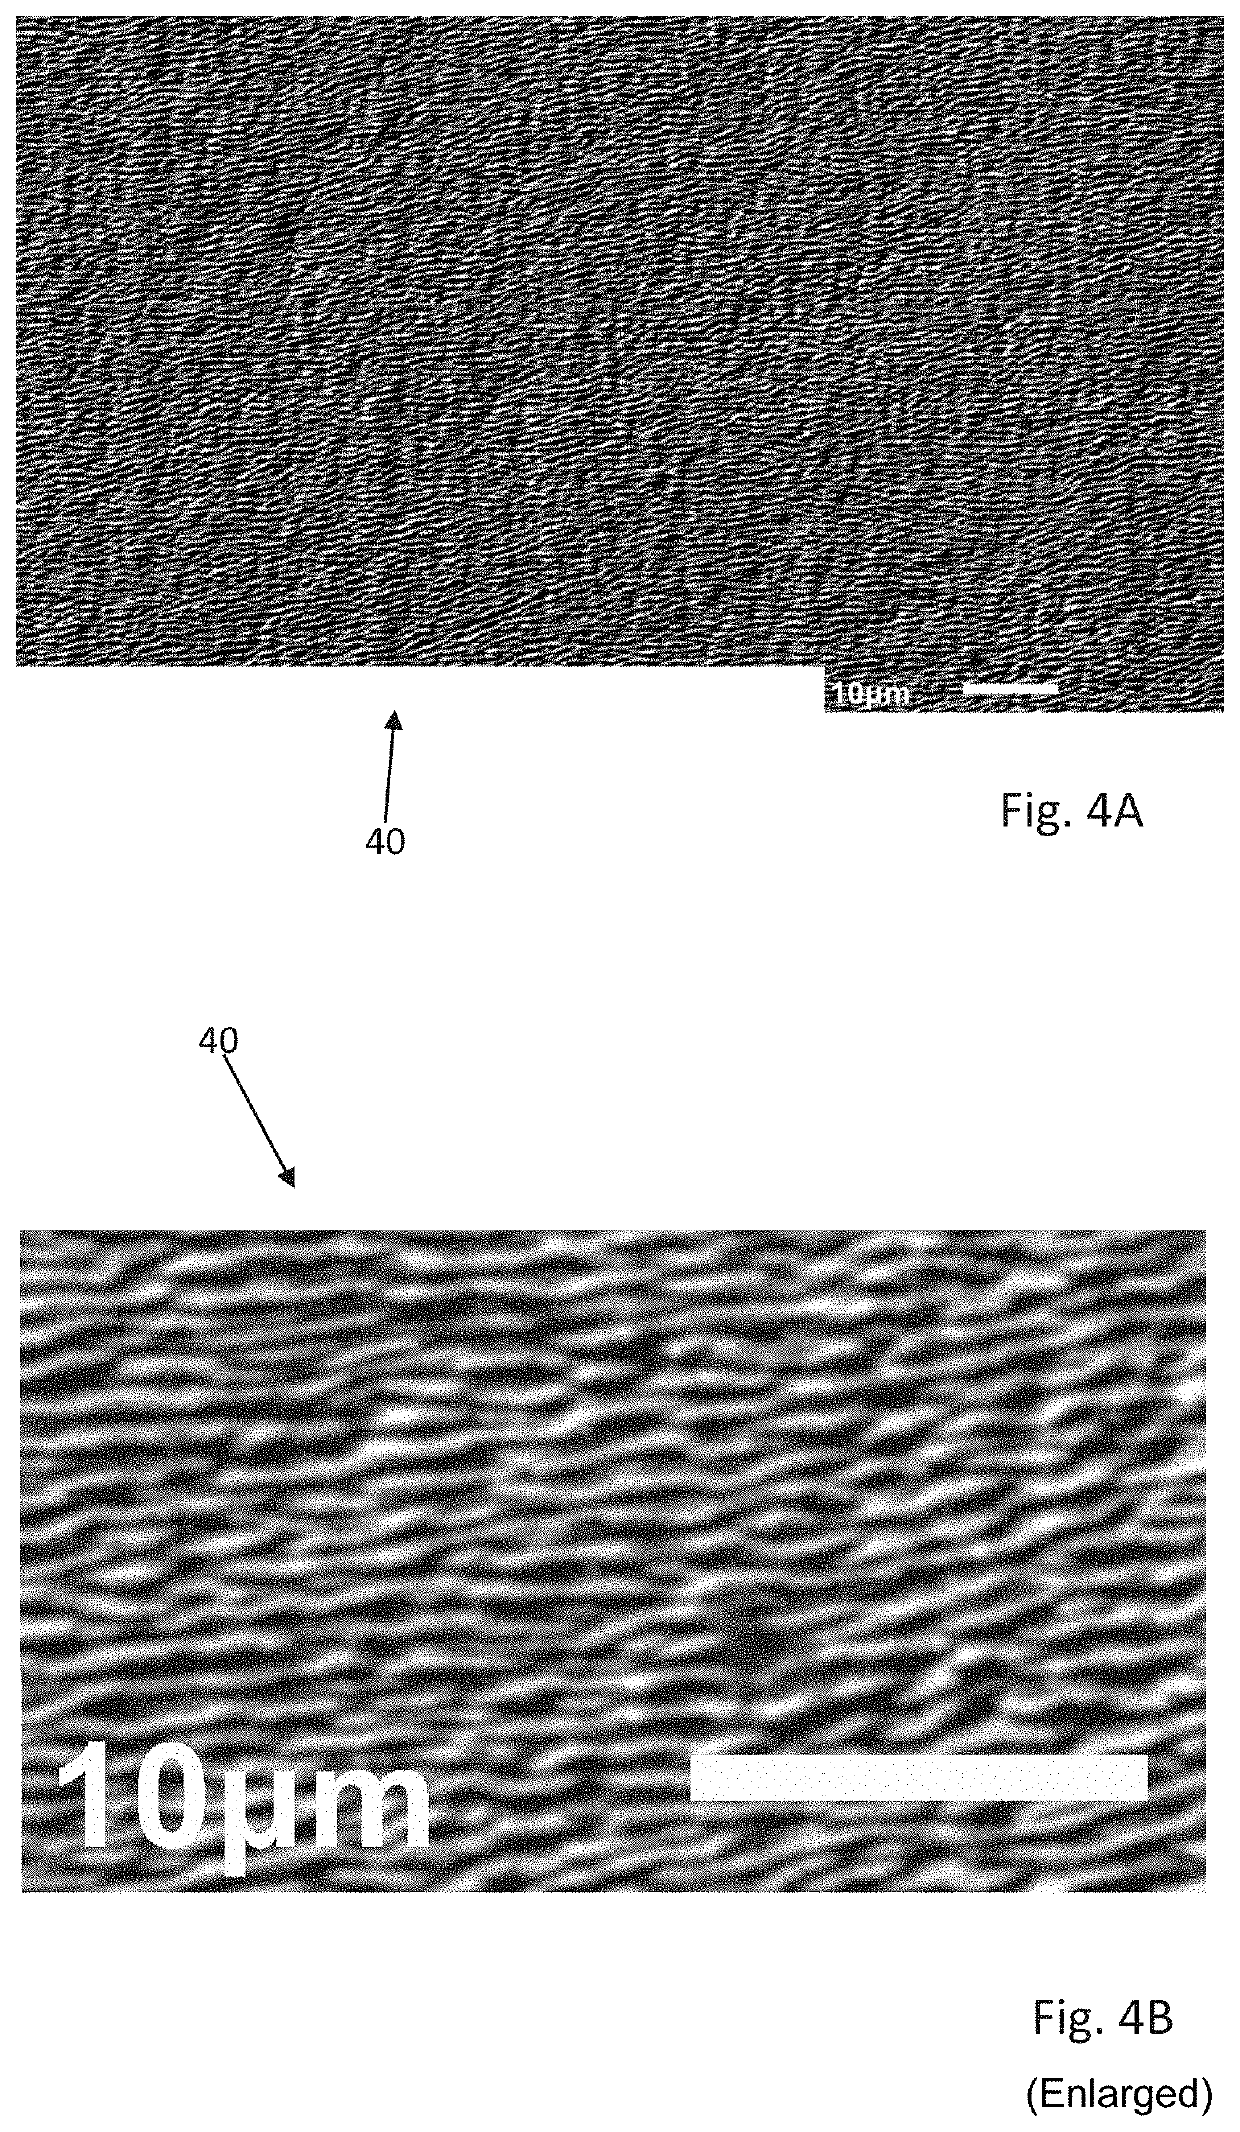 Separator plate with periodic surface structures in the nanometer to micrometer range